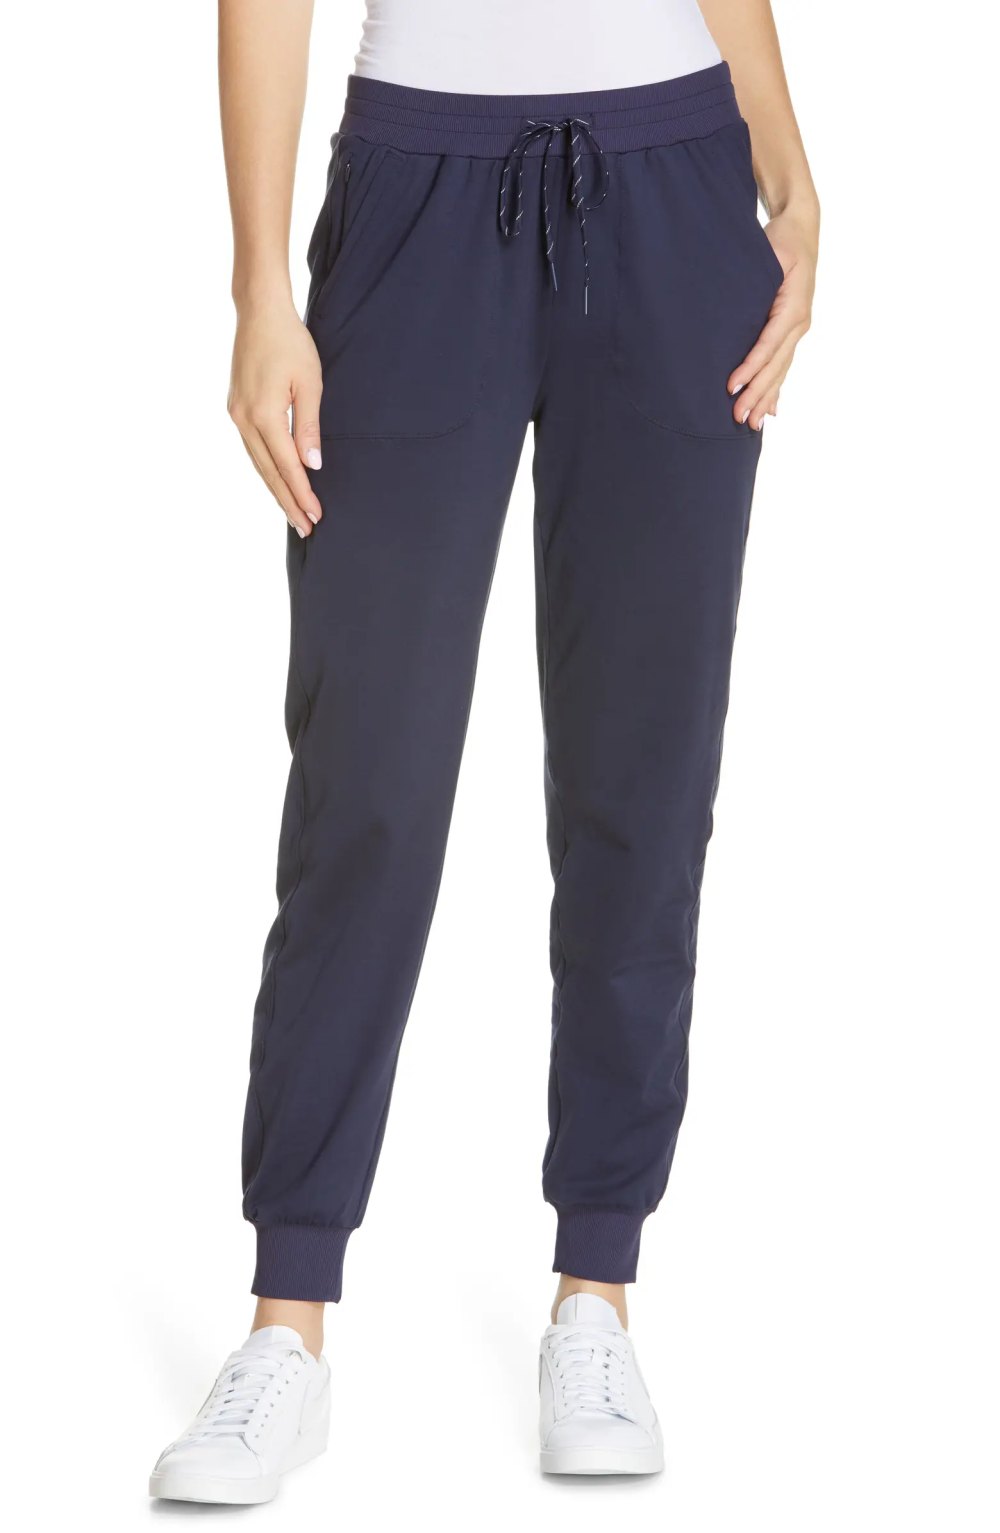 Golberg Women's Joggers – Soft and Lightweight – Exercise and Leisure  Activities